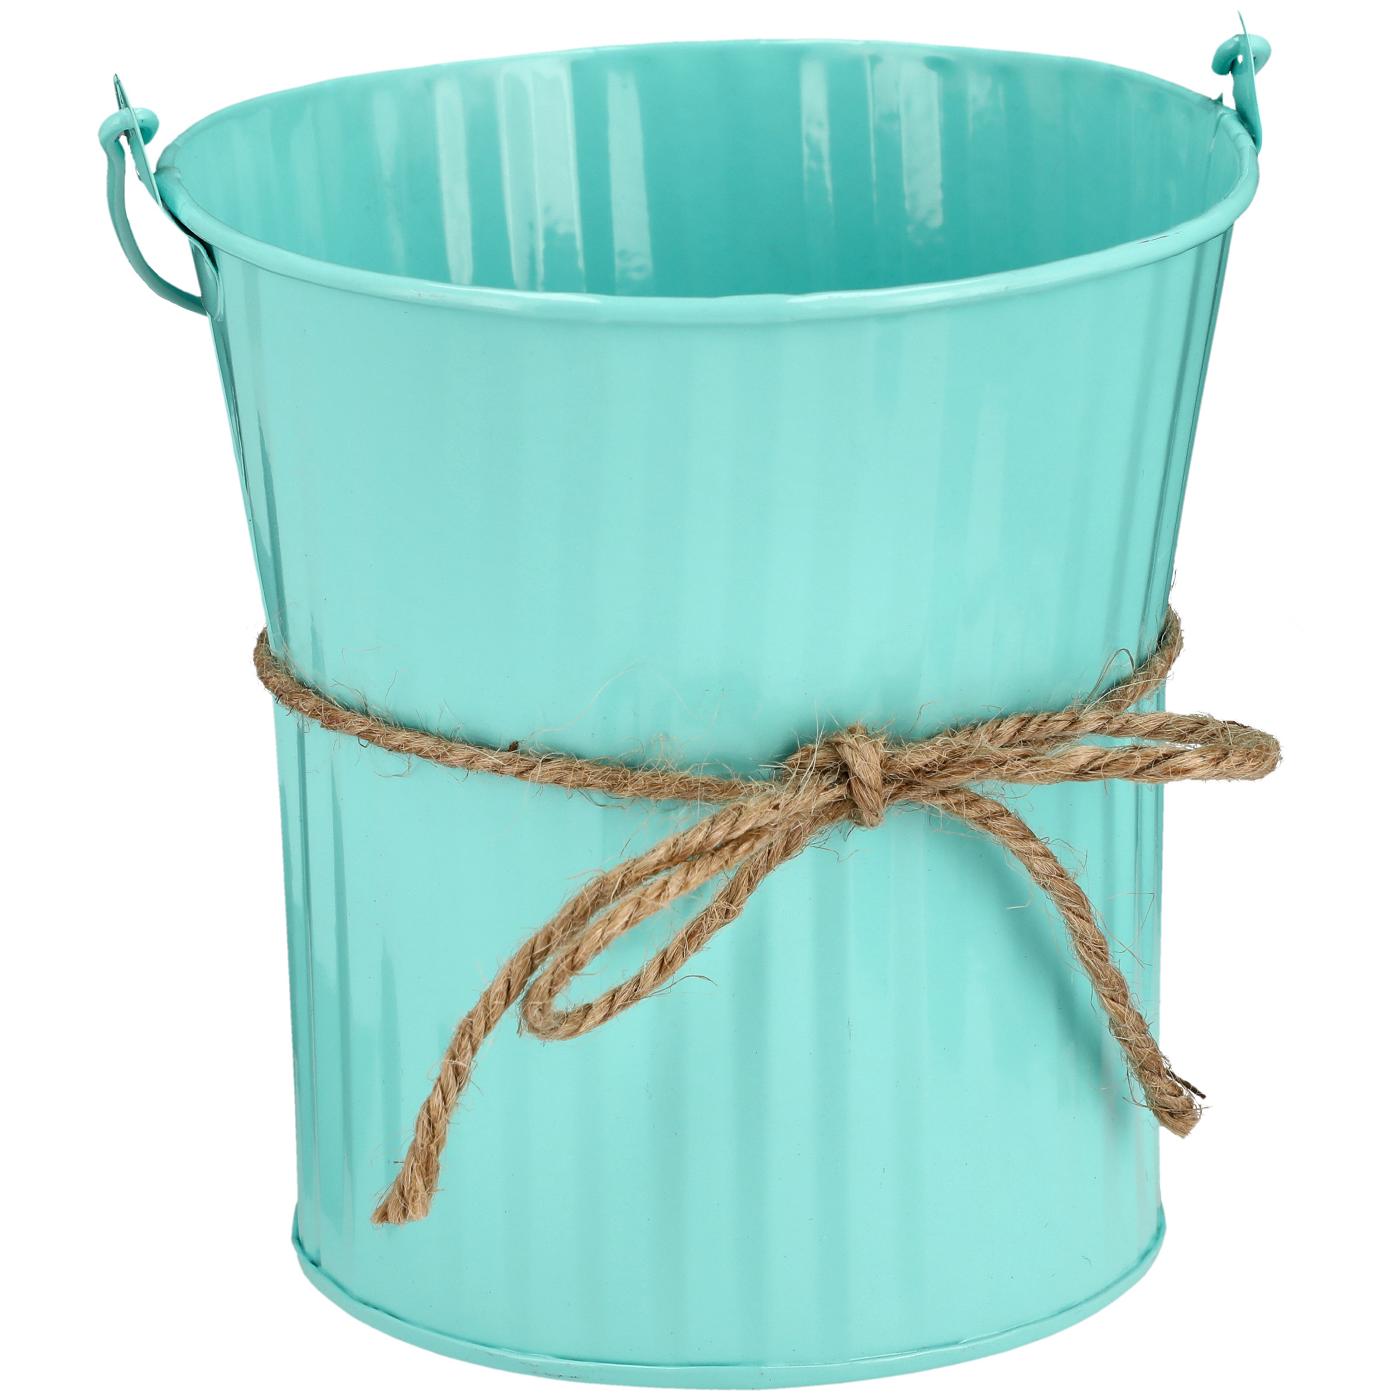 Destination Holiday Aqua Metal Tapered Easter Bucket; image 1 of 2